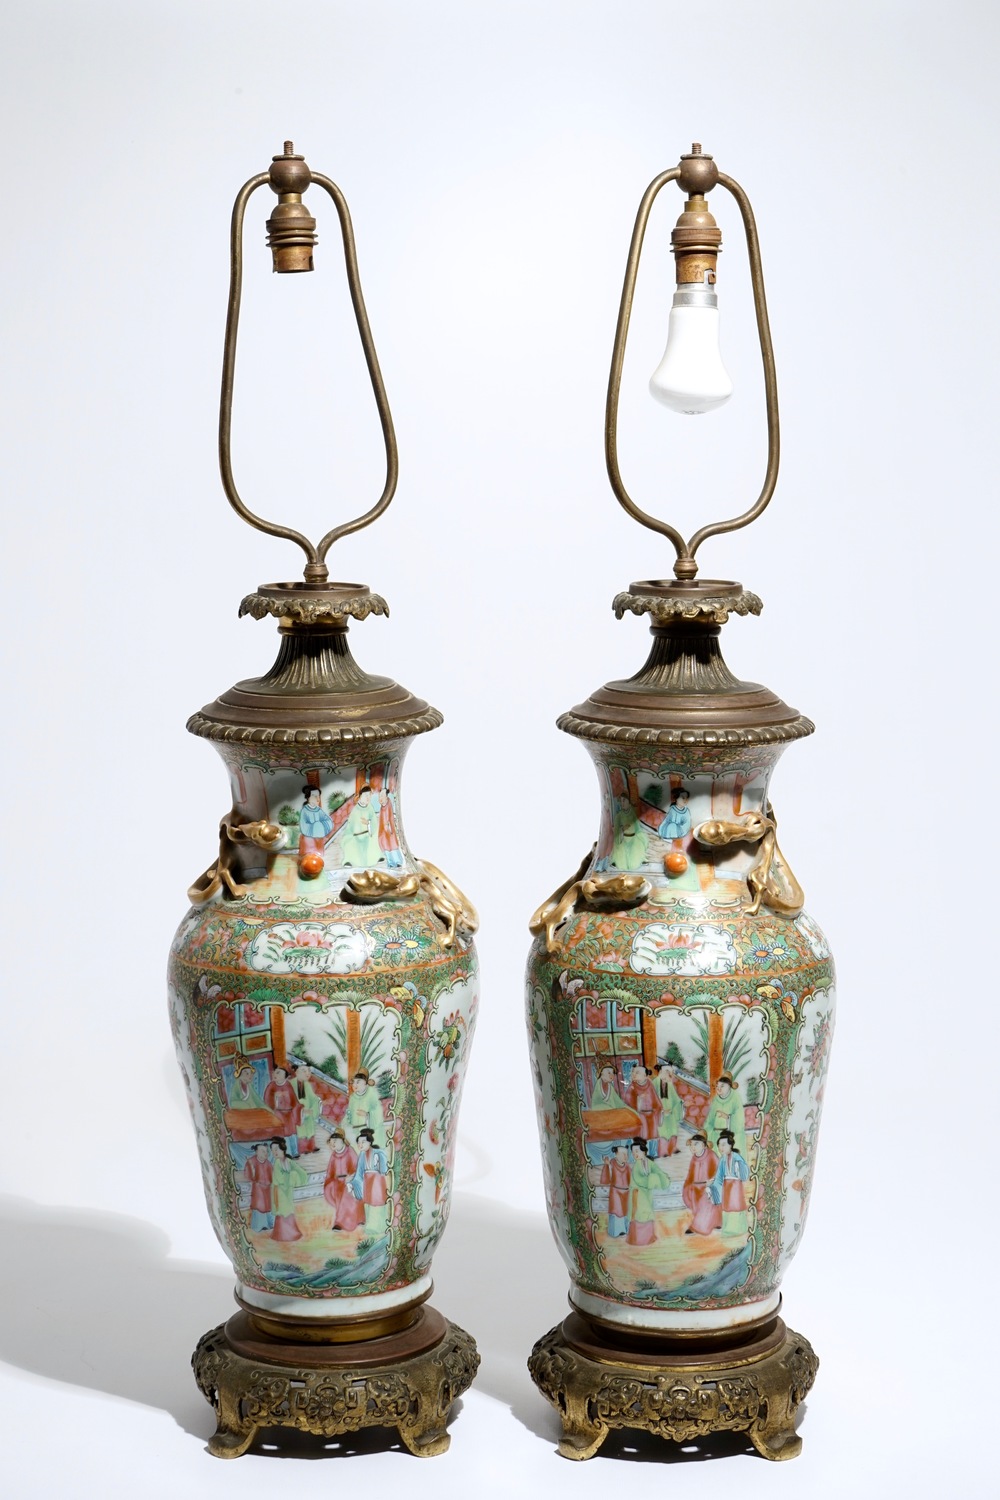 A pair of bronze-mounted Chinese Canton famille rose vases, transformed into lamps, 19th C.